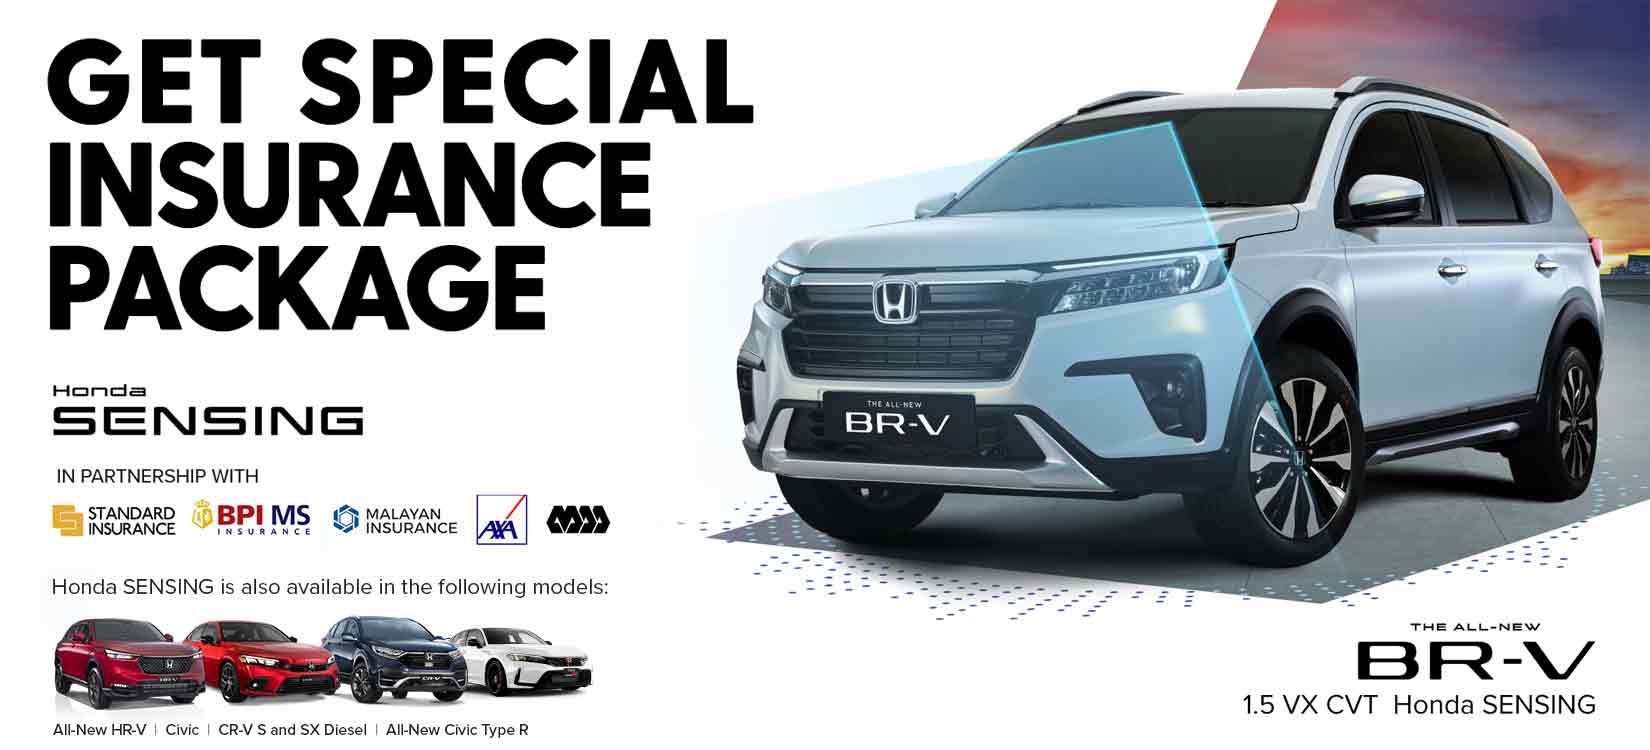 More peace of mind with the Honda SENSING Special Insurance Packages